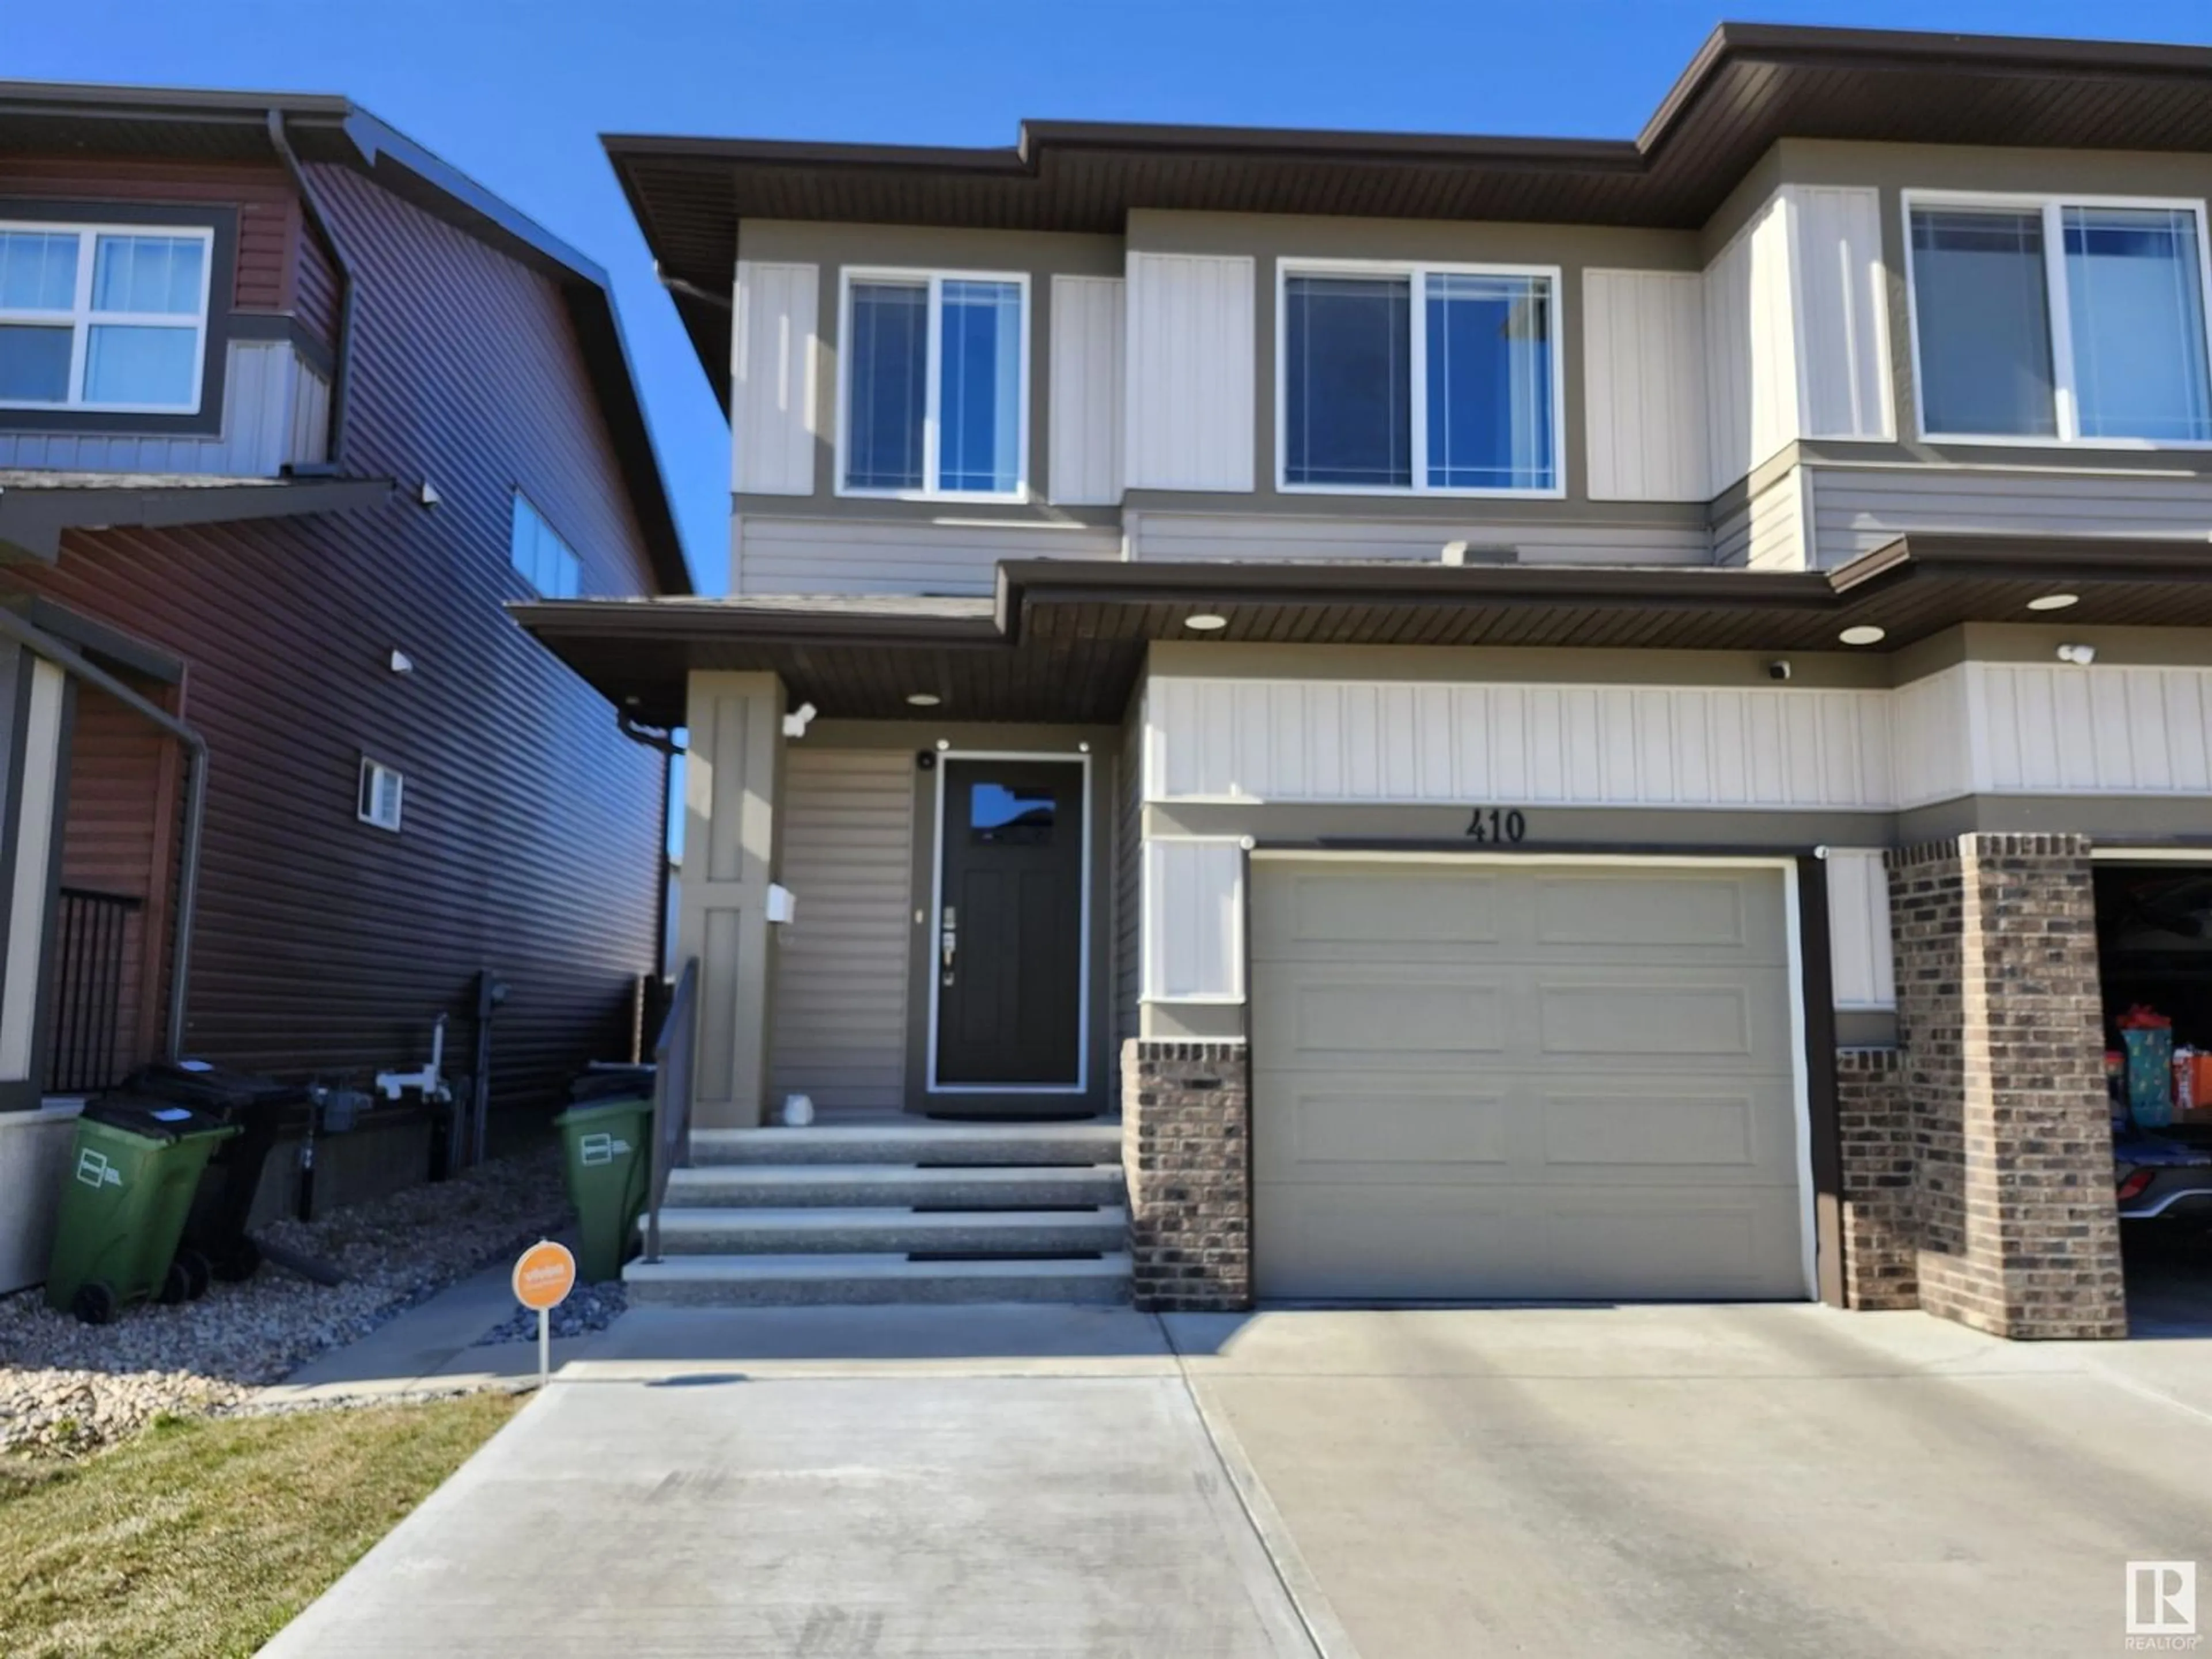 Frontside or backside of a home for 410 Crystallina Nera DR NW, Edmonton Alberta T5Z0P3